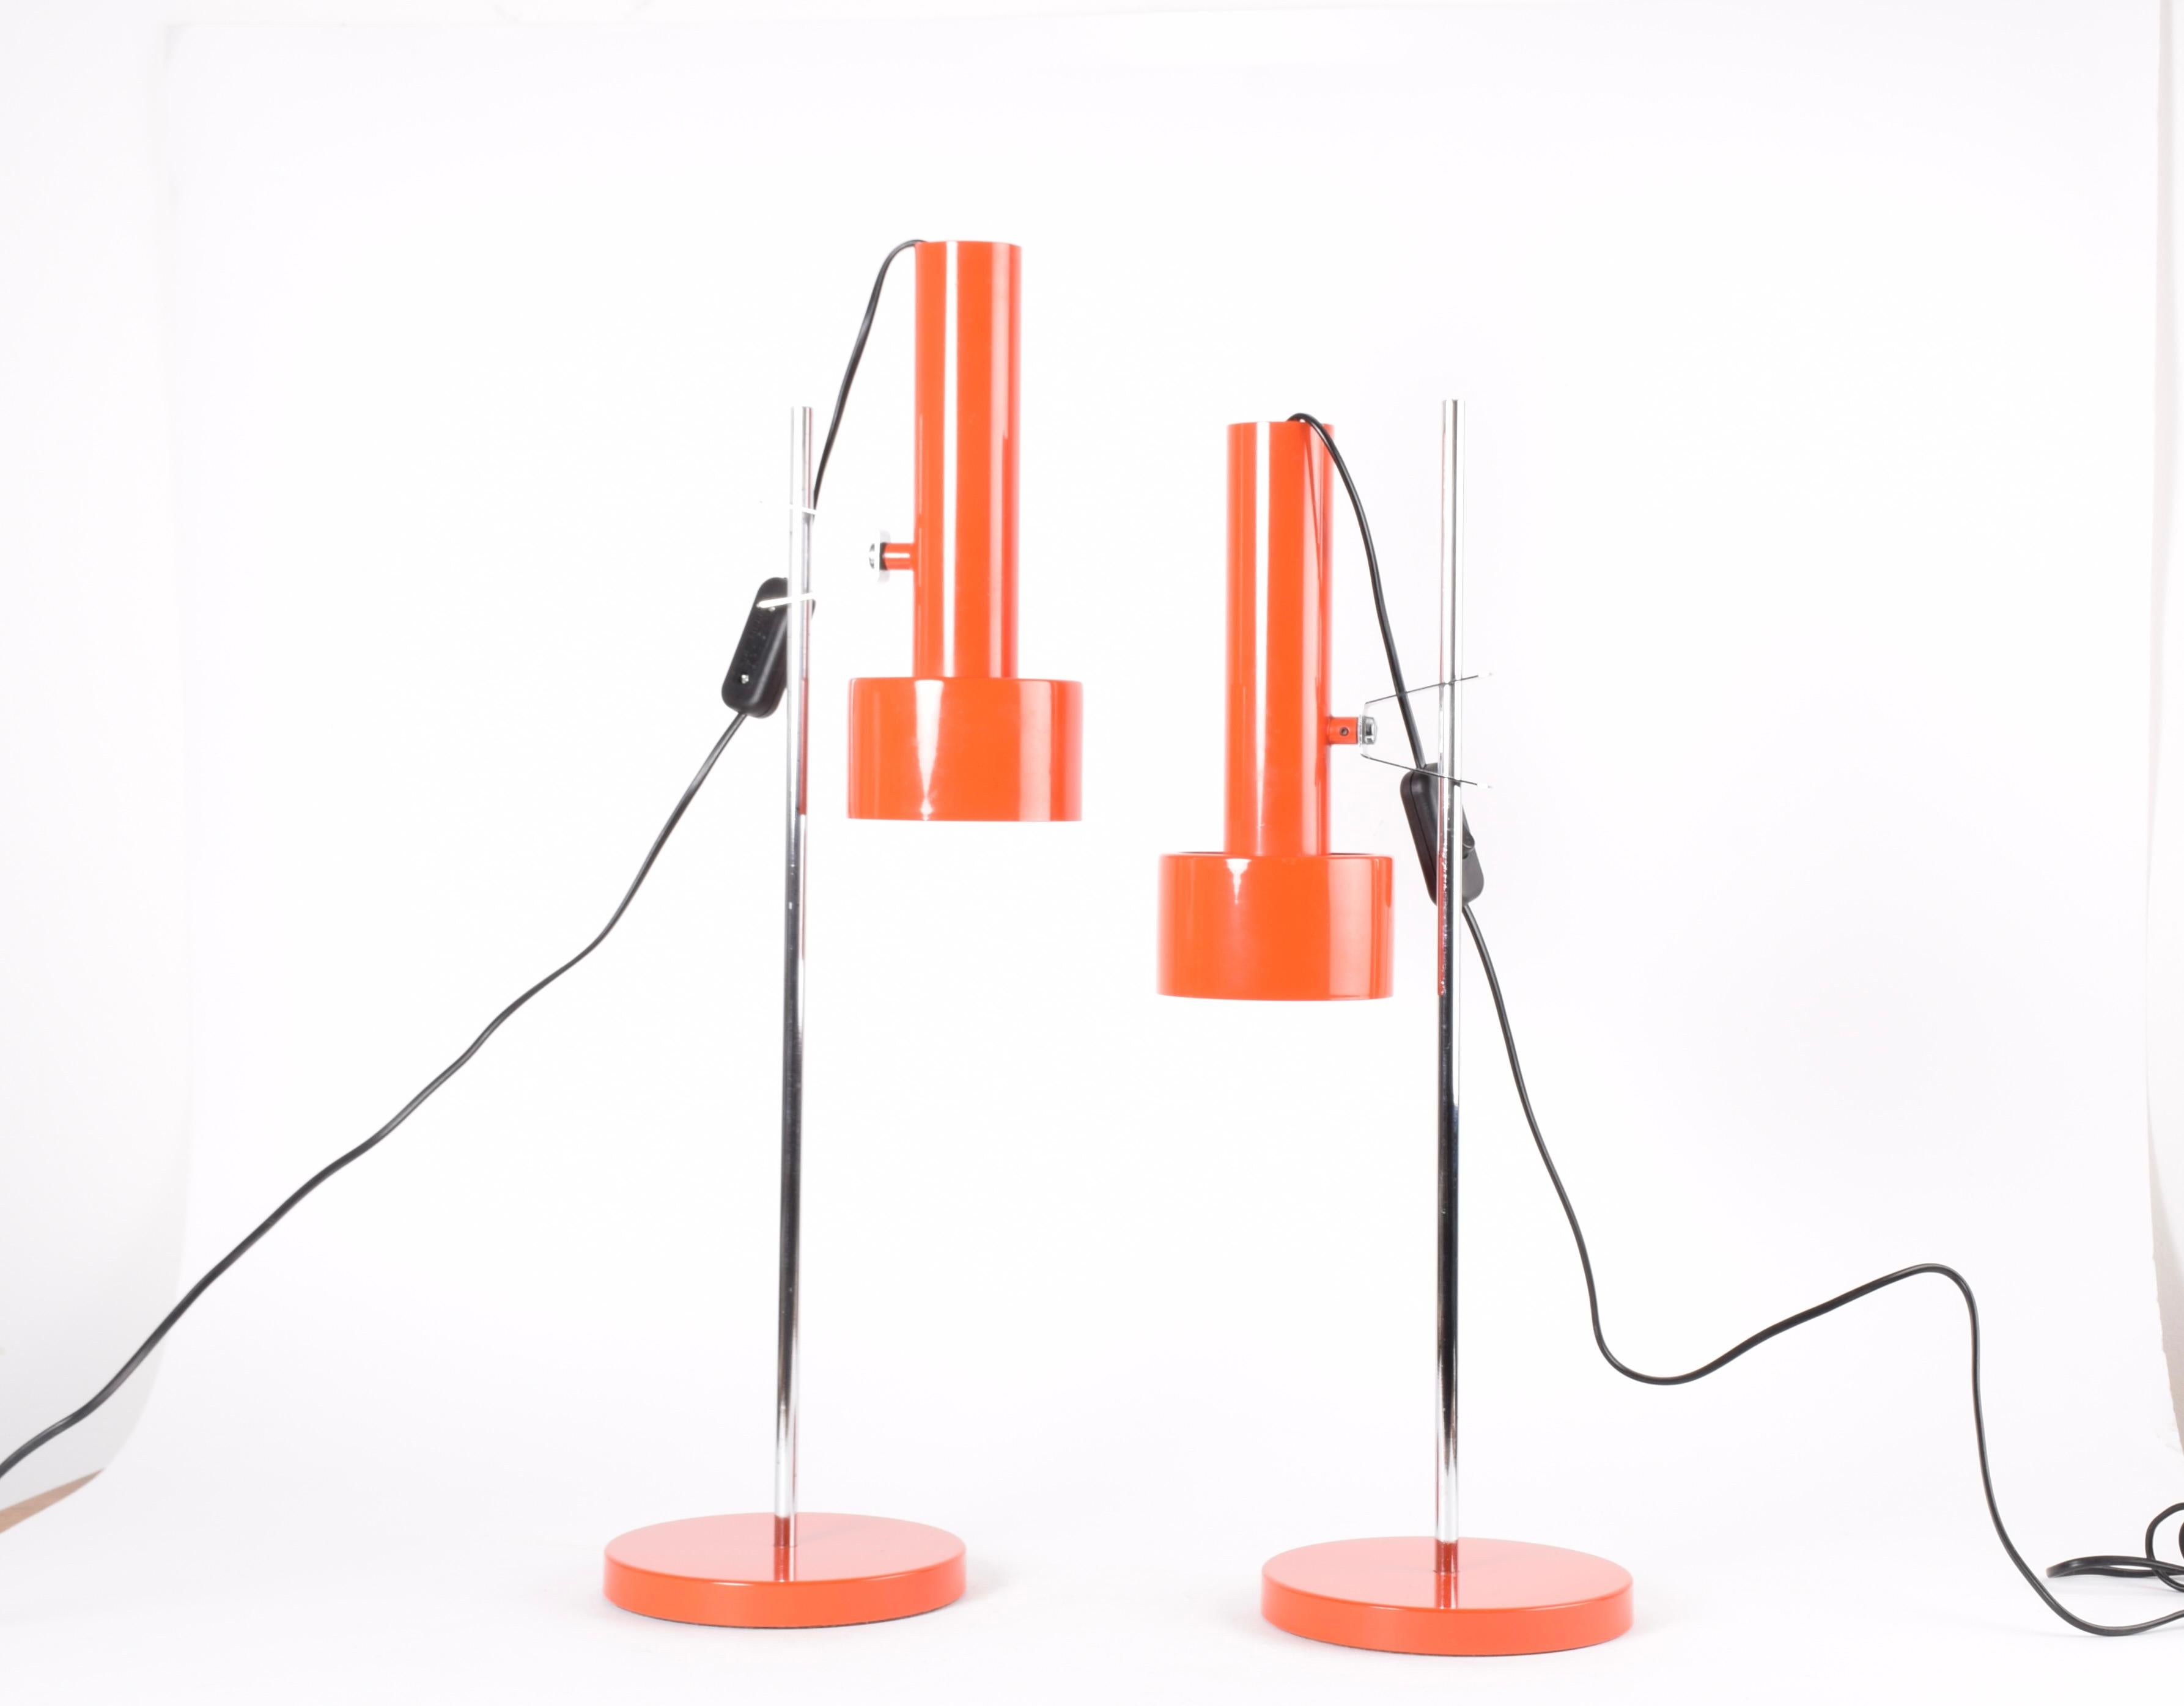 Mid-Century Modern Pair of Scandinavian Modern Desk Table Lamps, Orange Lacquer and Metal, 1970s For Sale